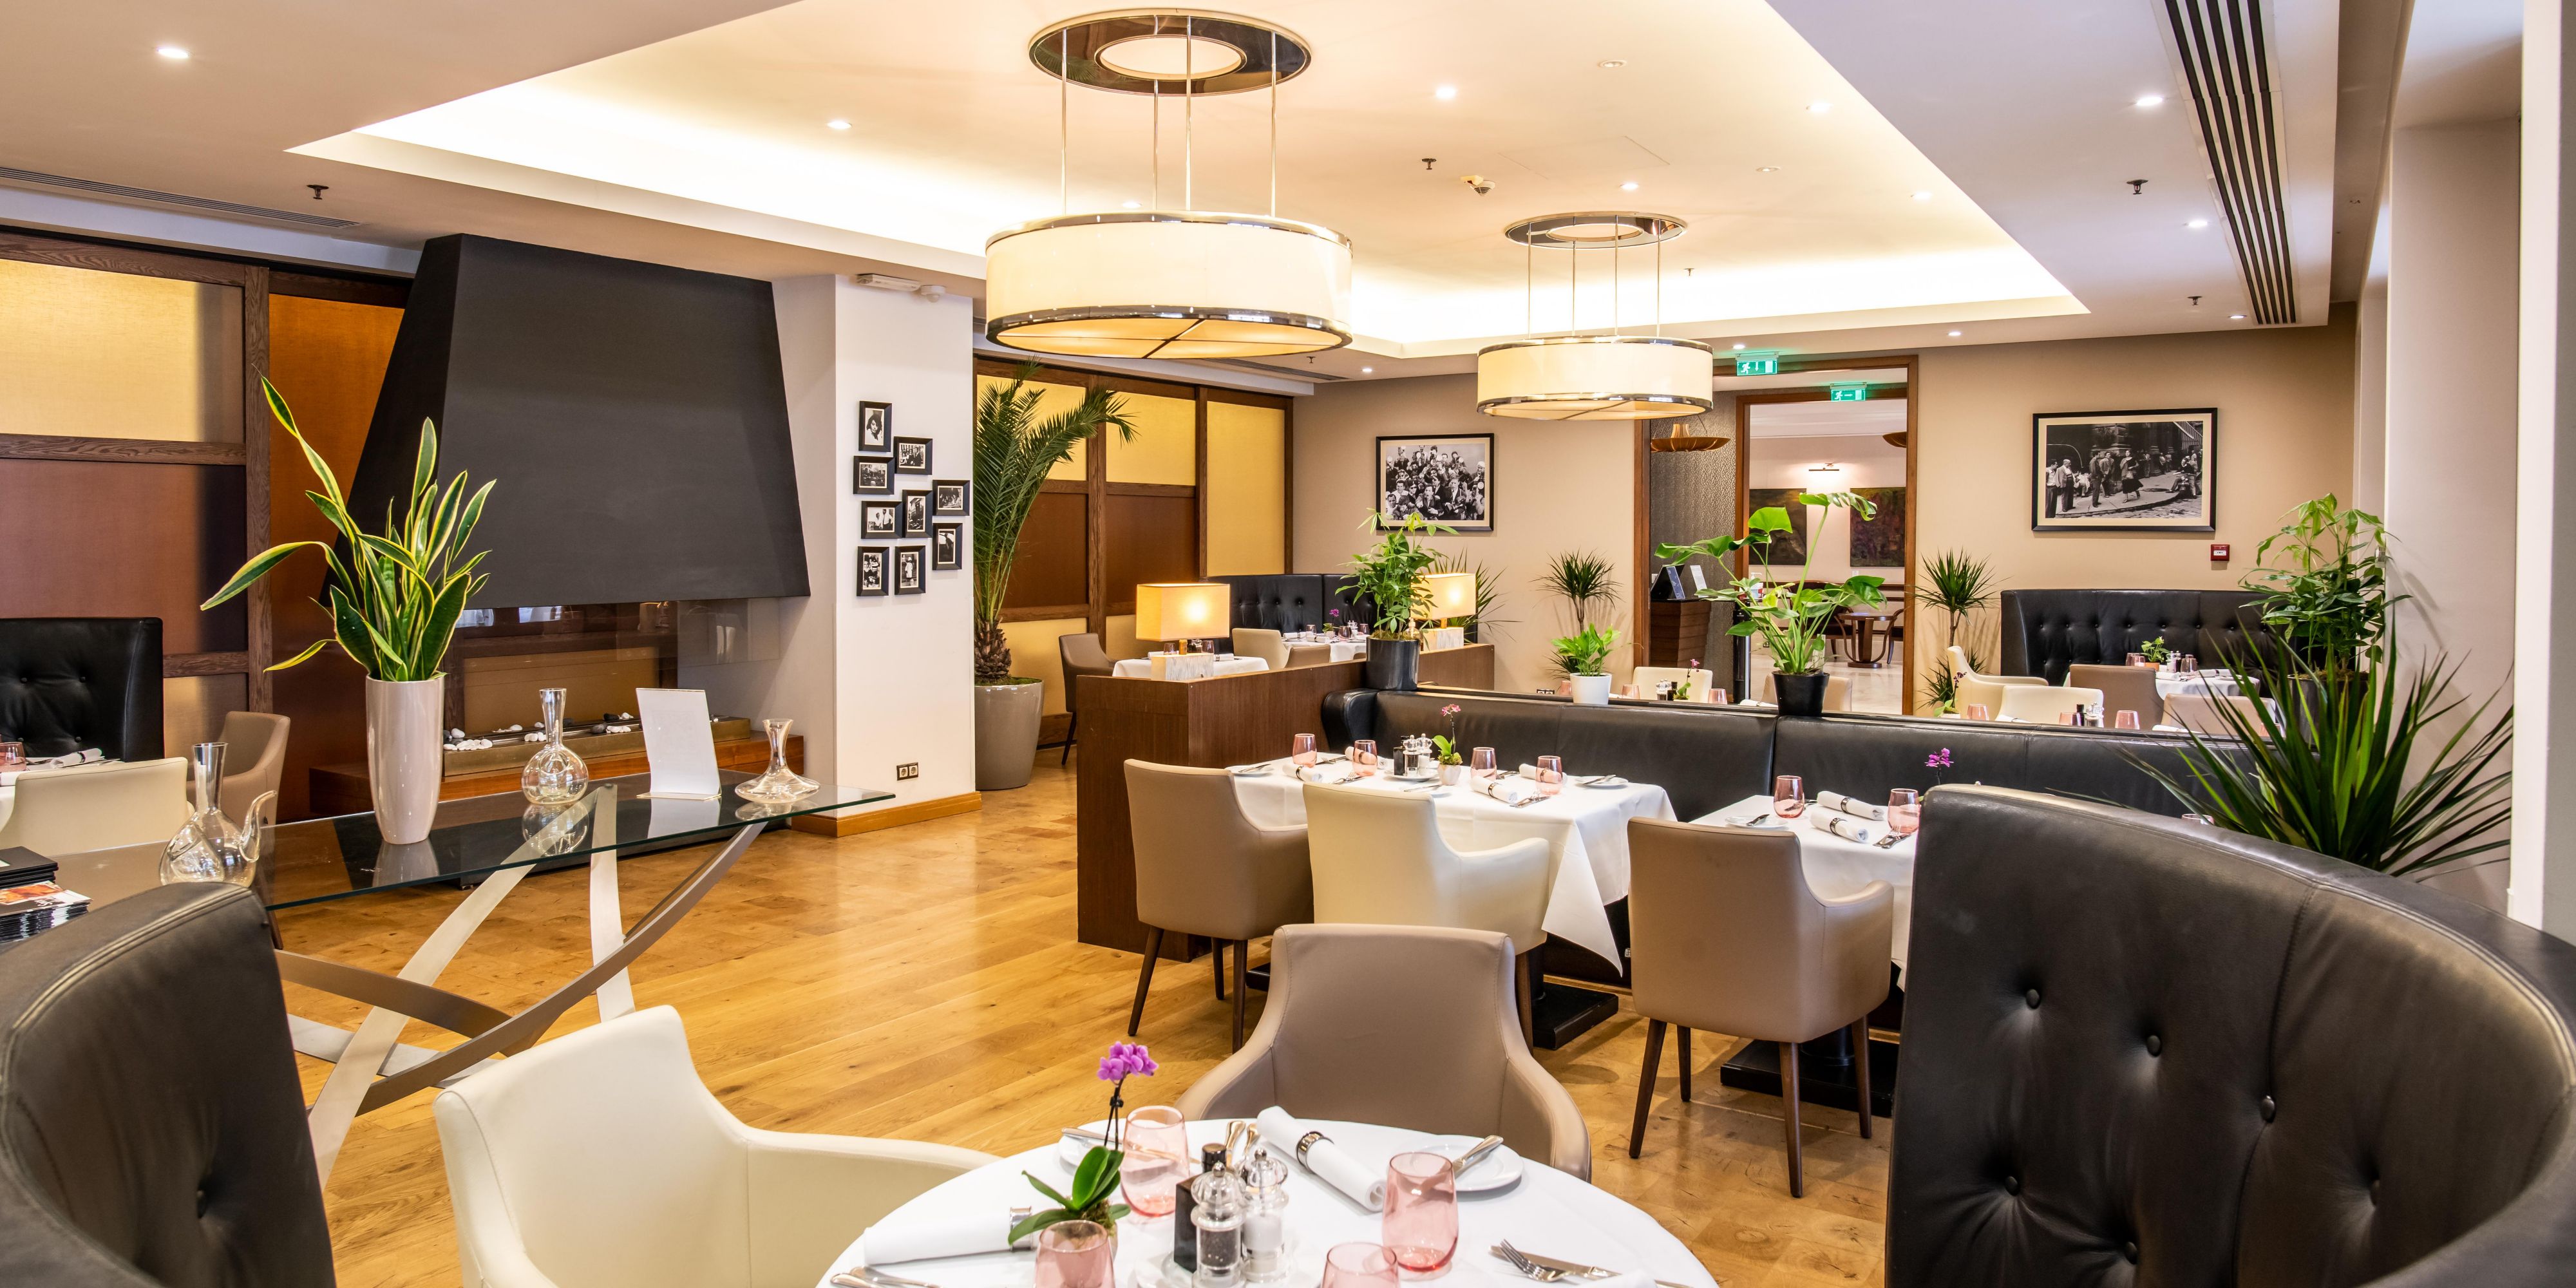 Roberto's Bucharest is the place where one can embark on a culinary journey with courses from all around Europe. The restaurant showcases fine dining at its best, thanks to the use of the freshest seasonal ingredients cooked to perfection.